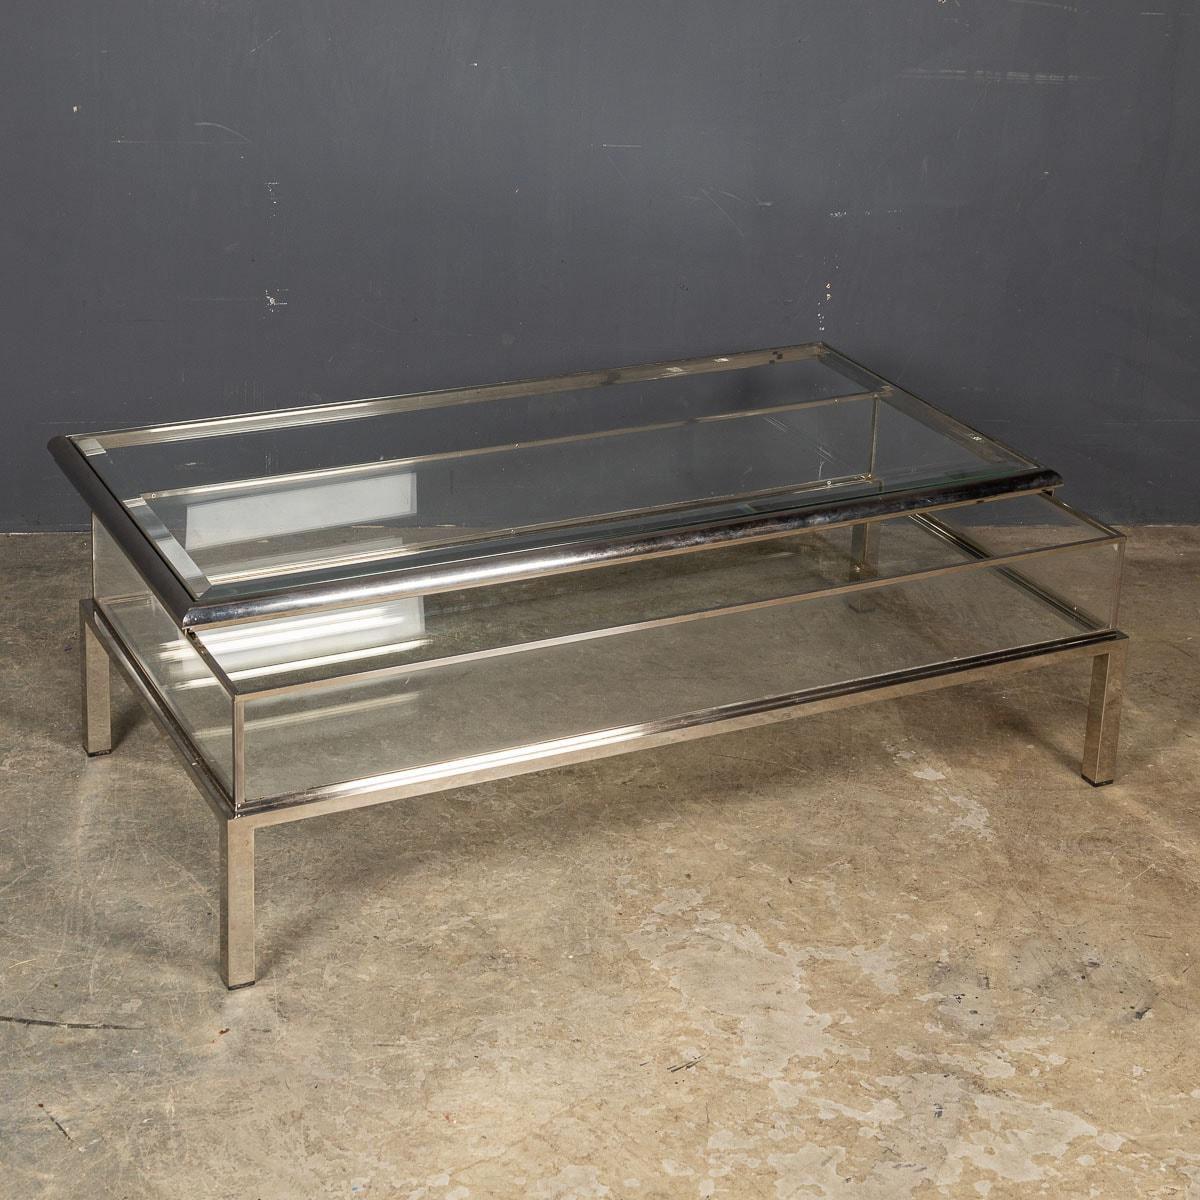 A 20th Century French vitrine coffee table in white metal, featuring a sliding top for easy access to the interior. The vitrine's original walls are crafted from perspex, while the top and bottom of the table are made of glass.

CONDITION
In Great